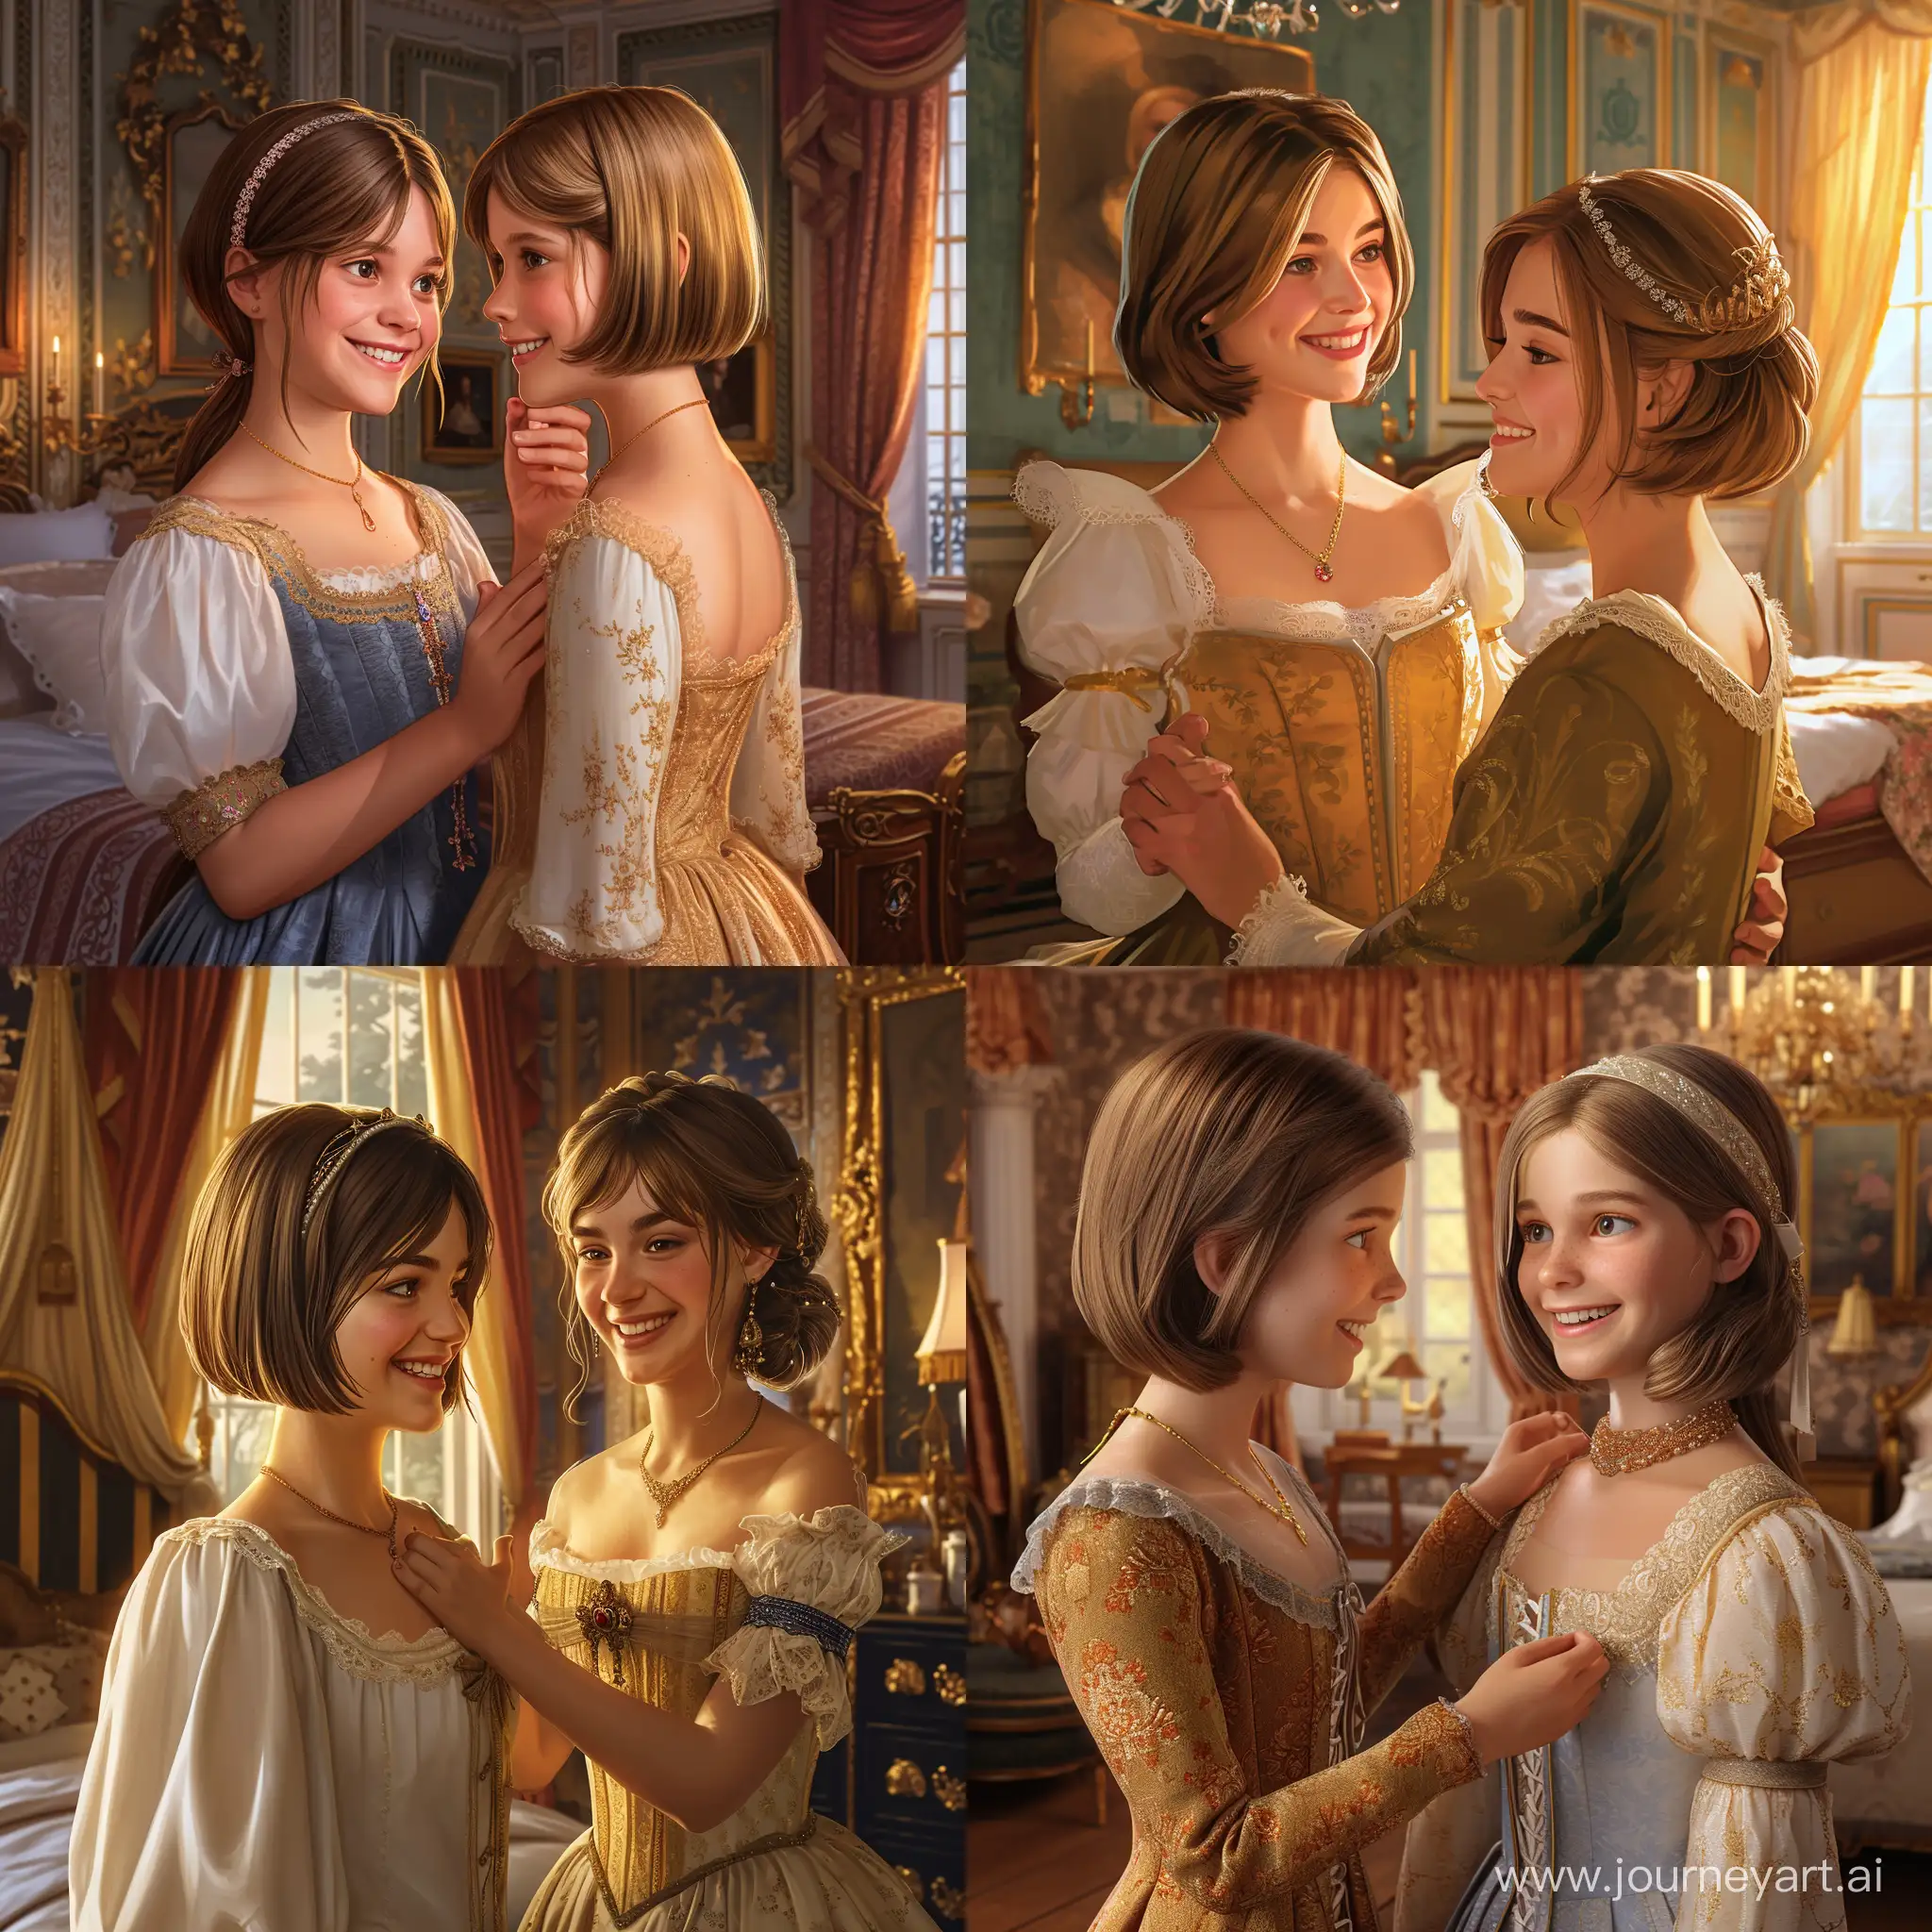 Regency-Princess-Persuading-Sister-for-a-Haircut-in-Golden-Hour-Bedroom-Scene